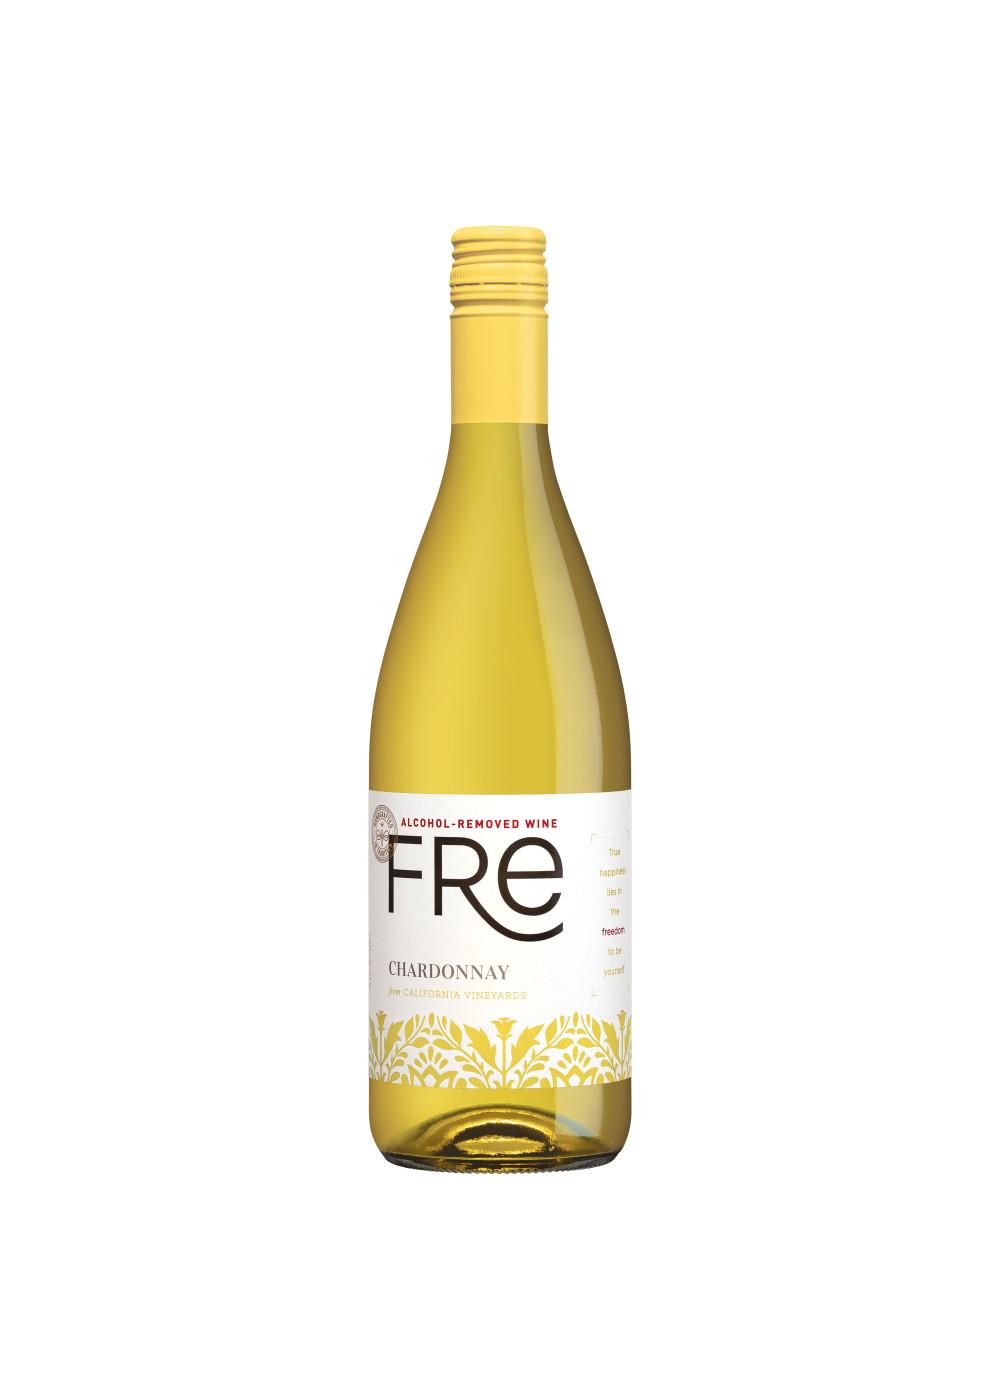 Sutter Home Family Vineyards Fre Alcohol Removed Chardonnay; image 1 of 4